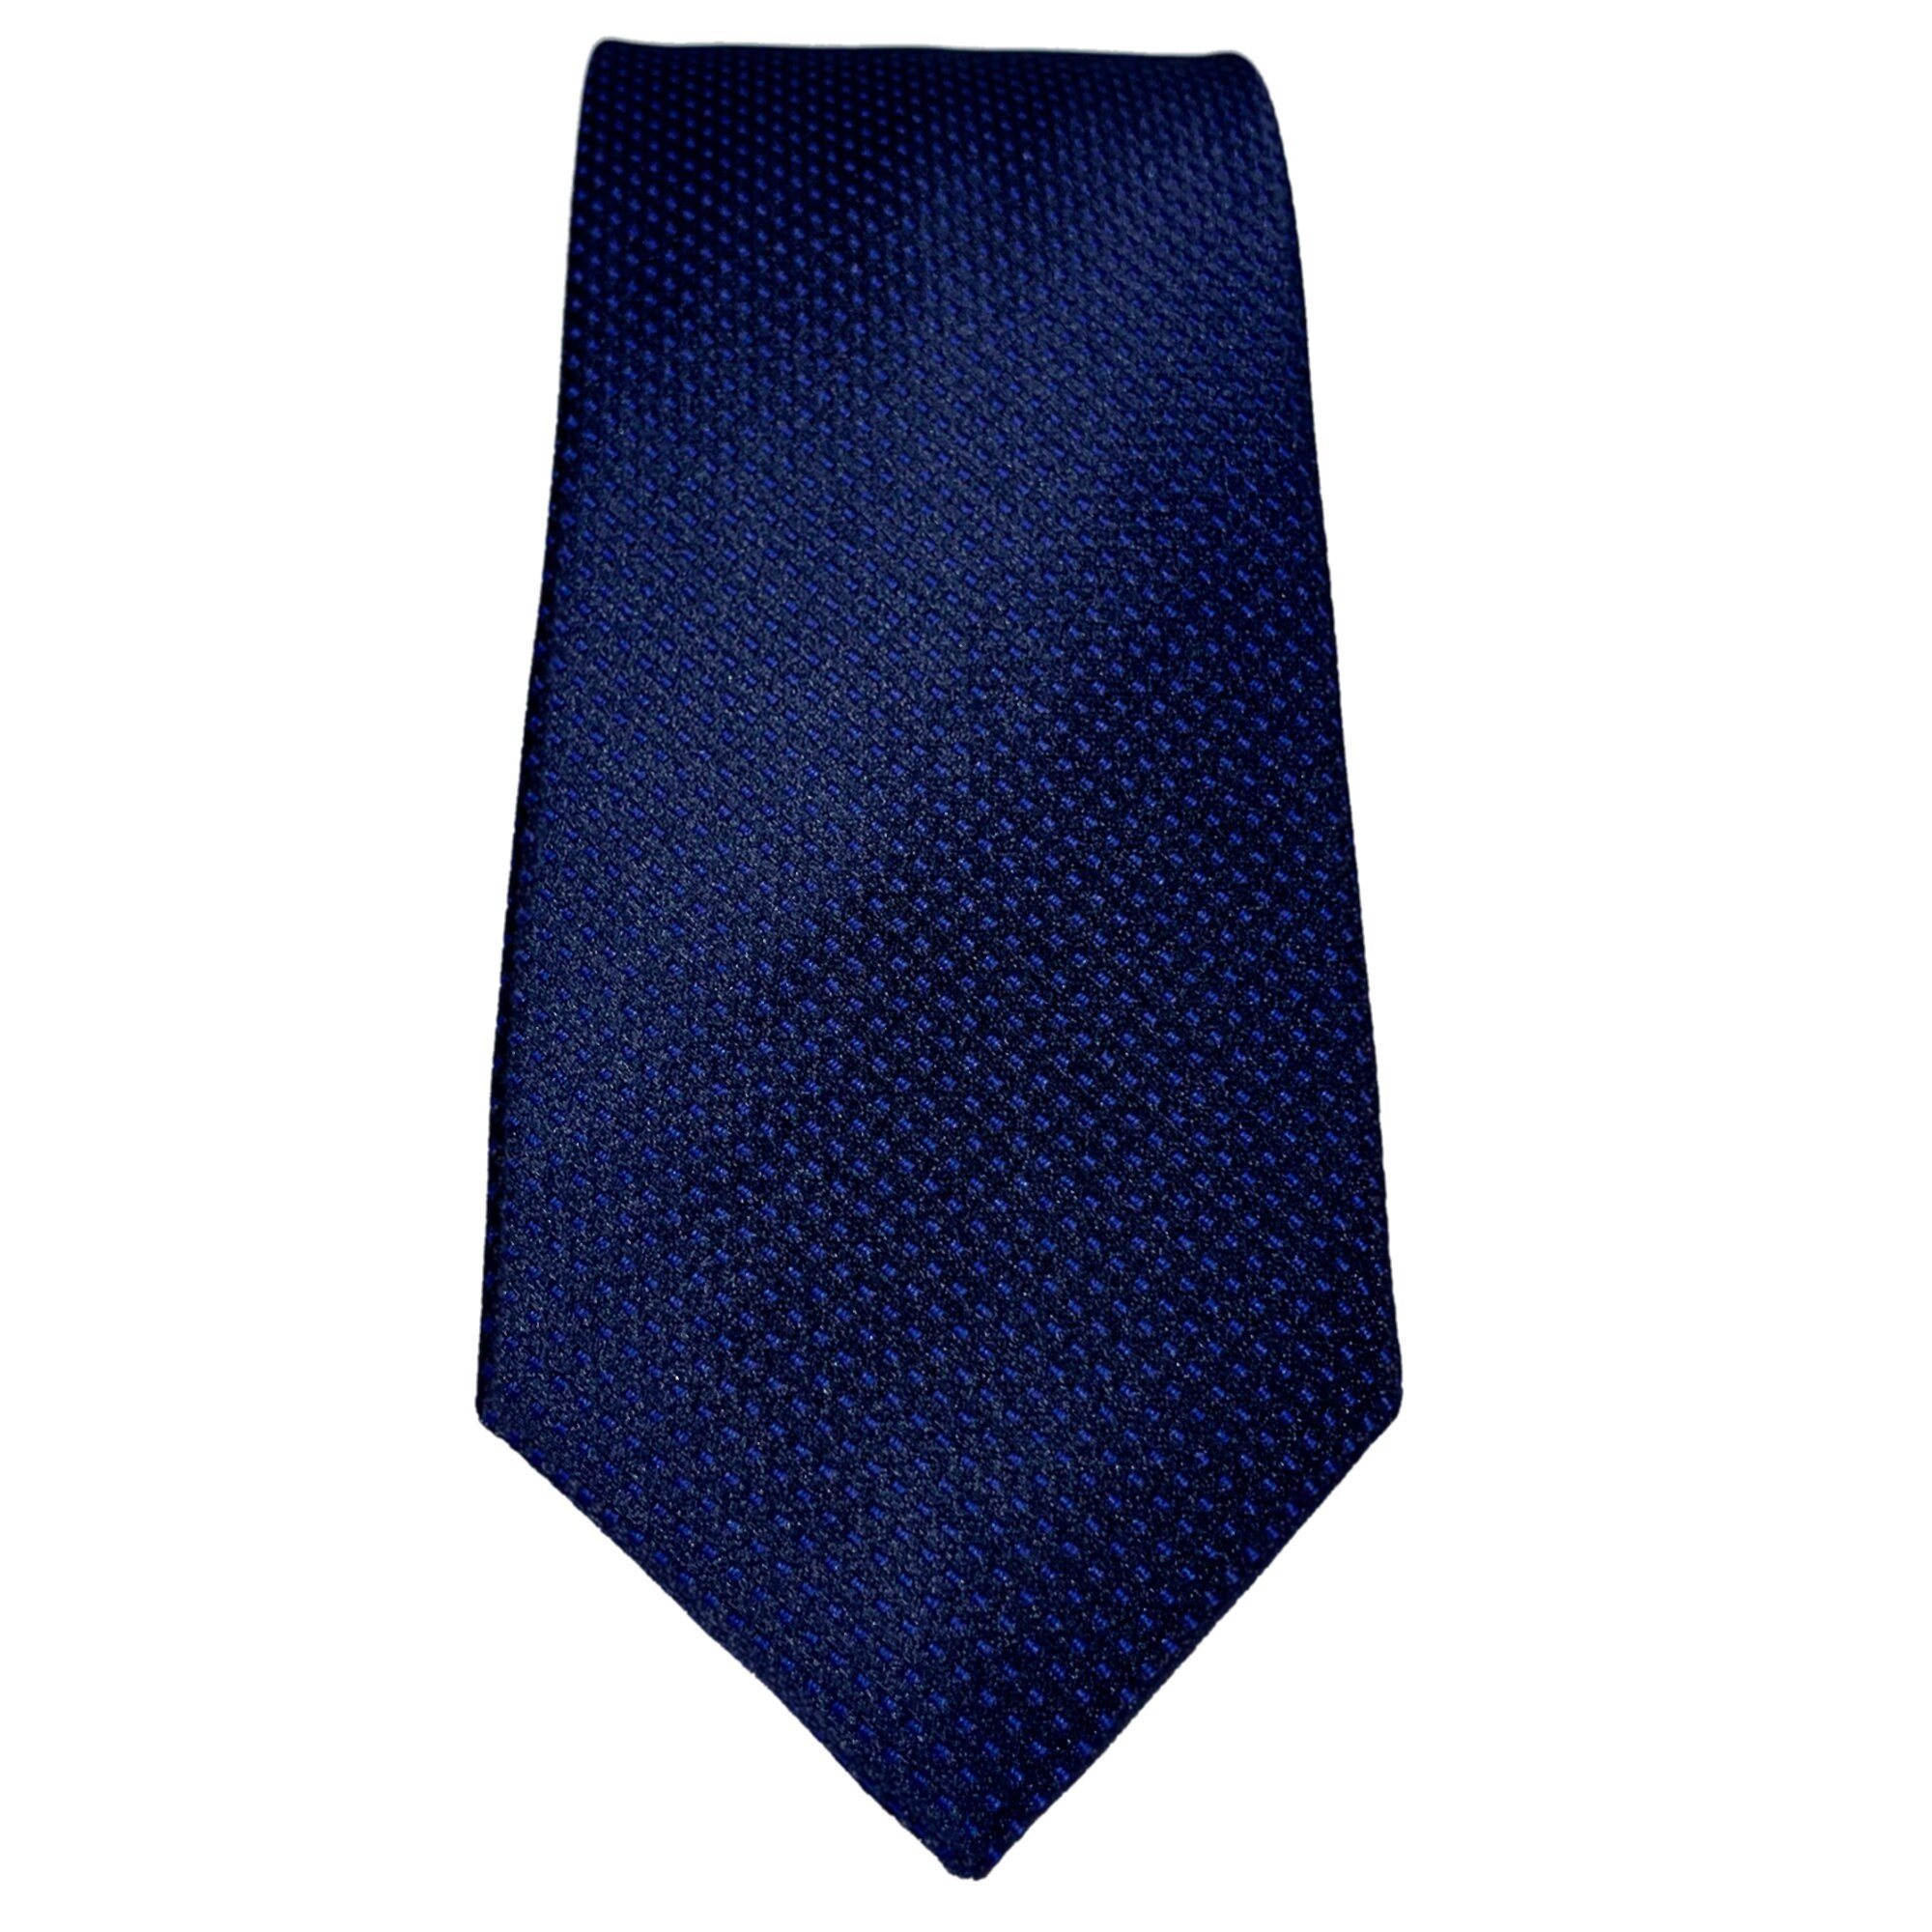 Men's Necktie Blue Color Small Dotted on Dark Blue - Etsy